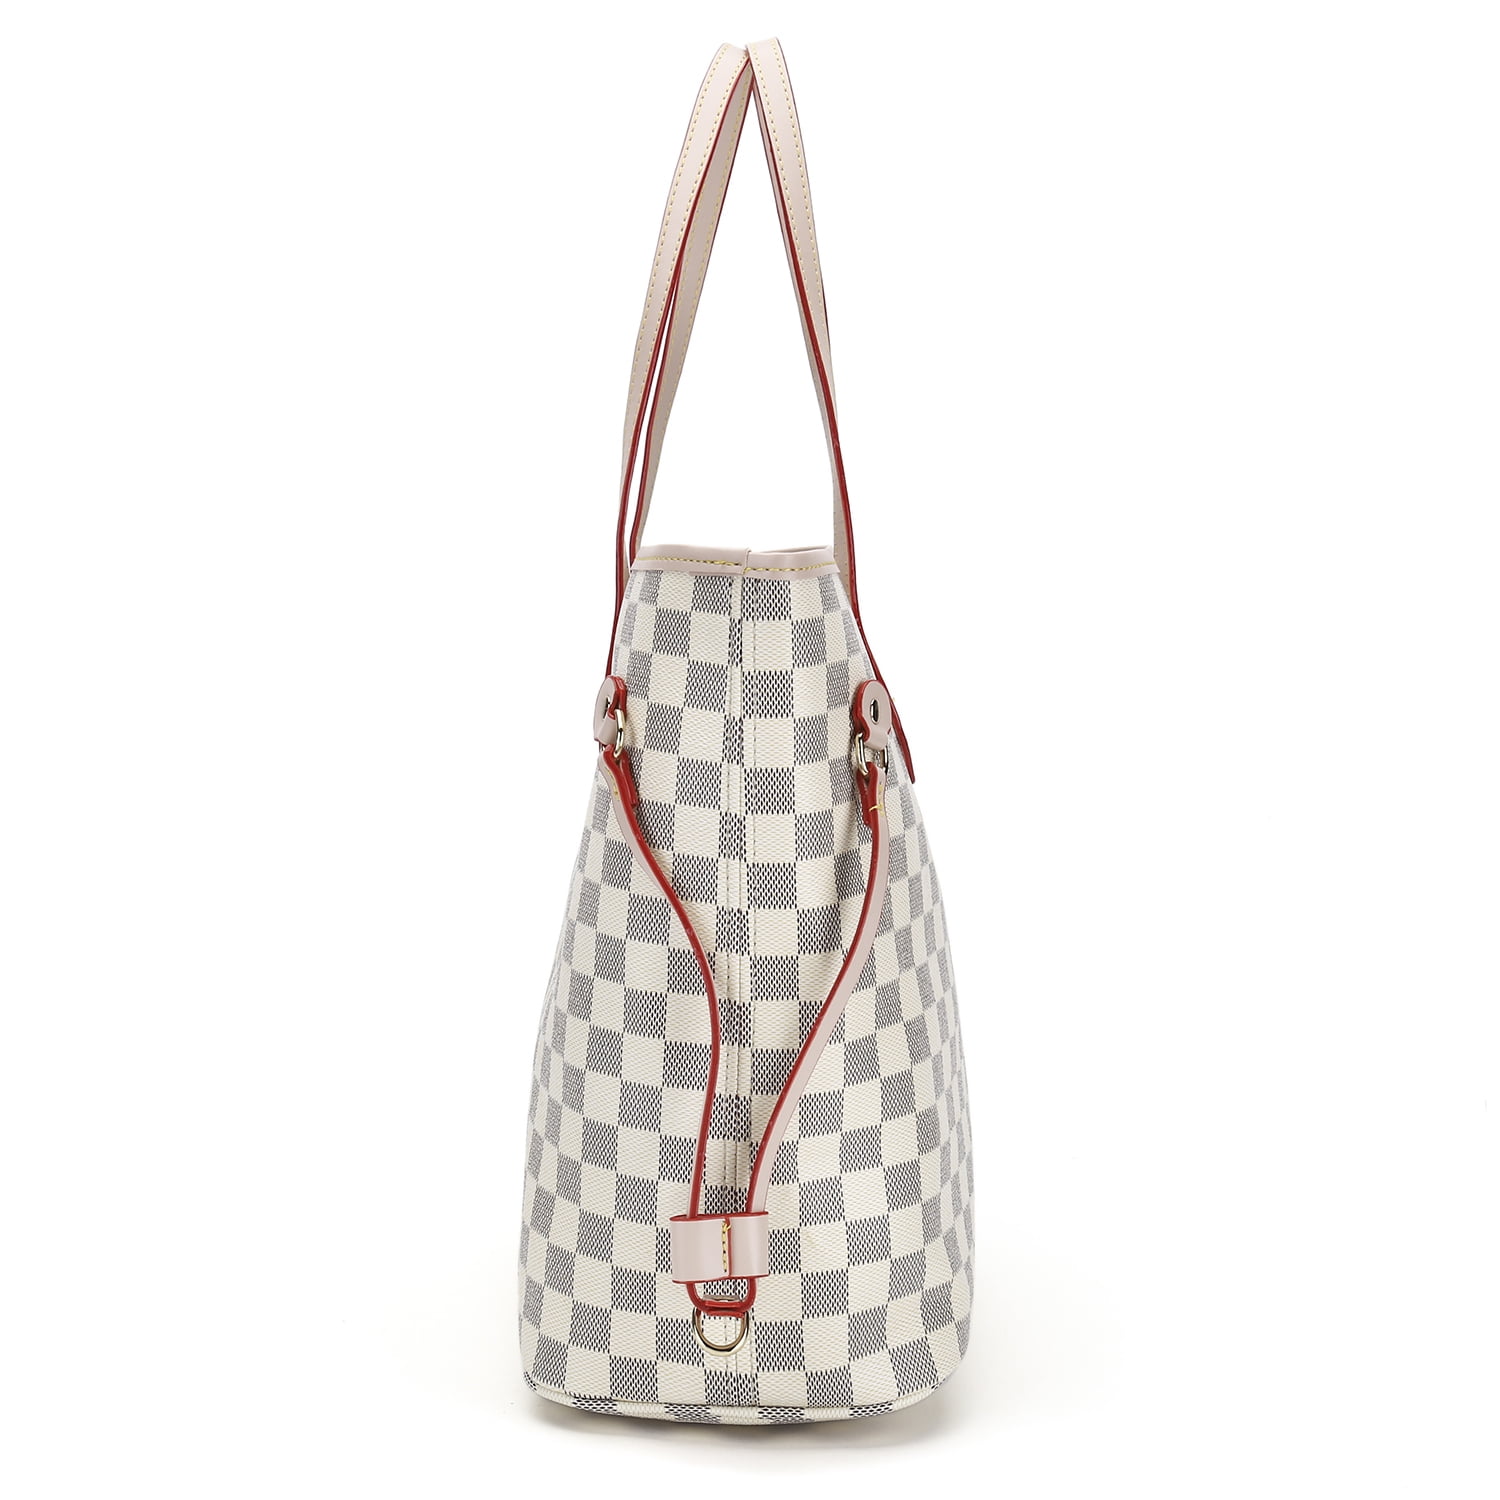 Richports Checkered Tote Shoulder Bag with Inner Pouch with Women's Rose Gold-Tone Bracelet Watch, Size: Large, Beige